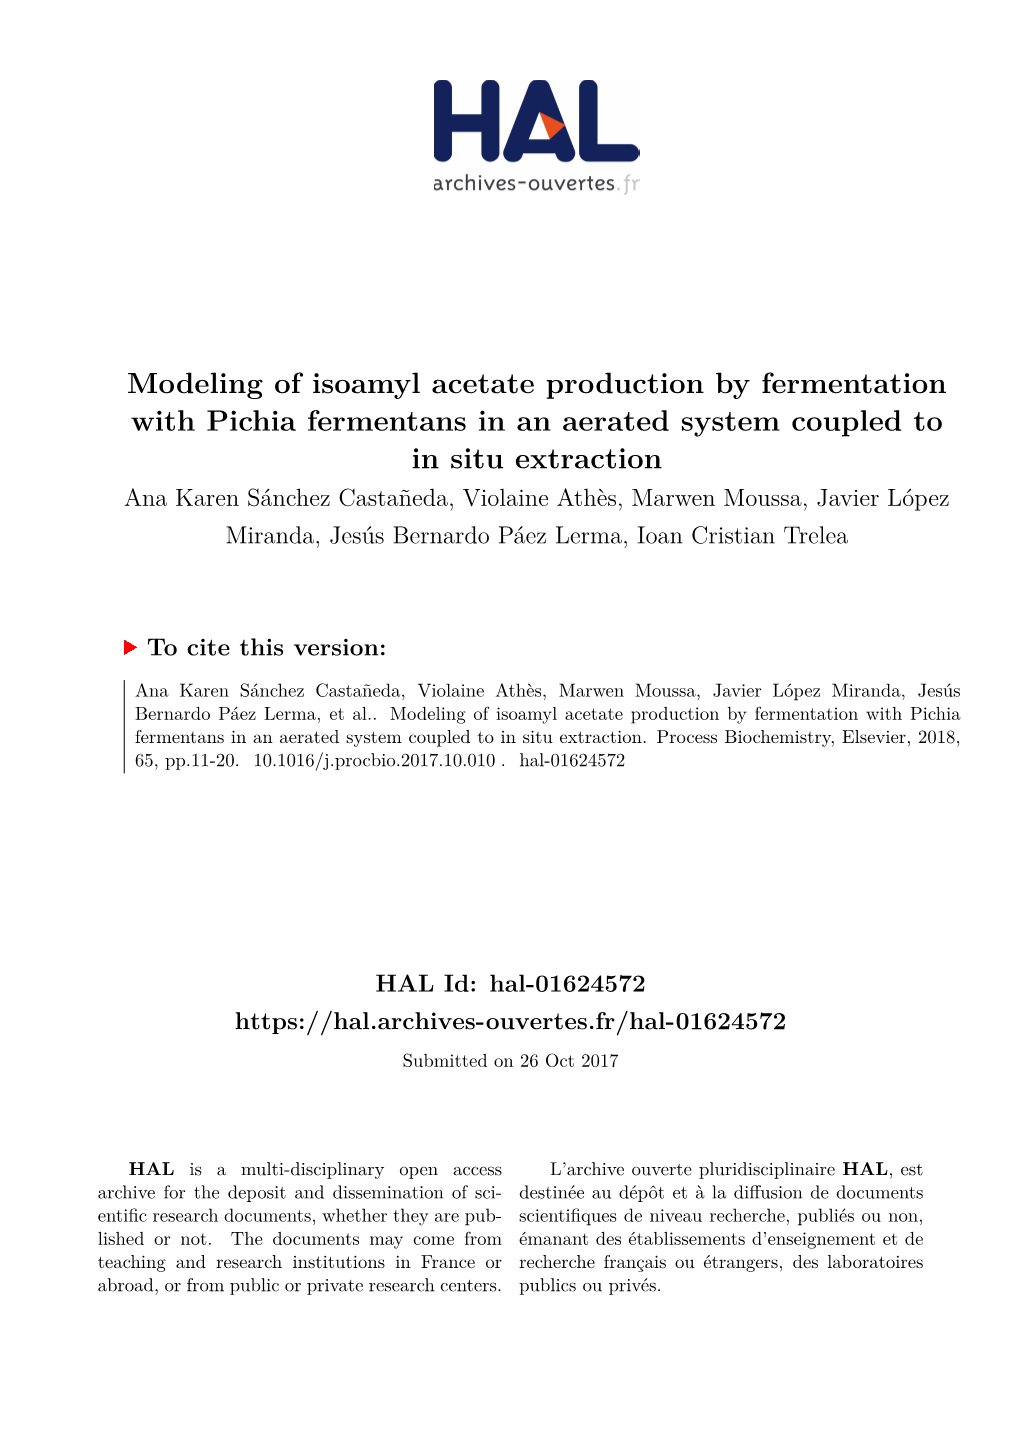 Modeling of Isoamyl Acetate Production by Fermentation With